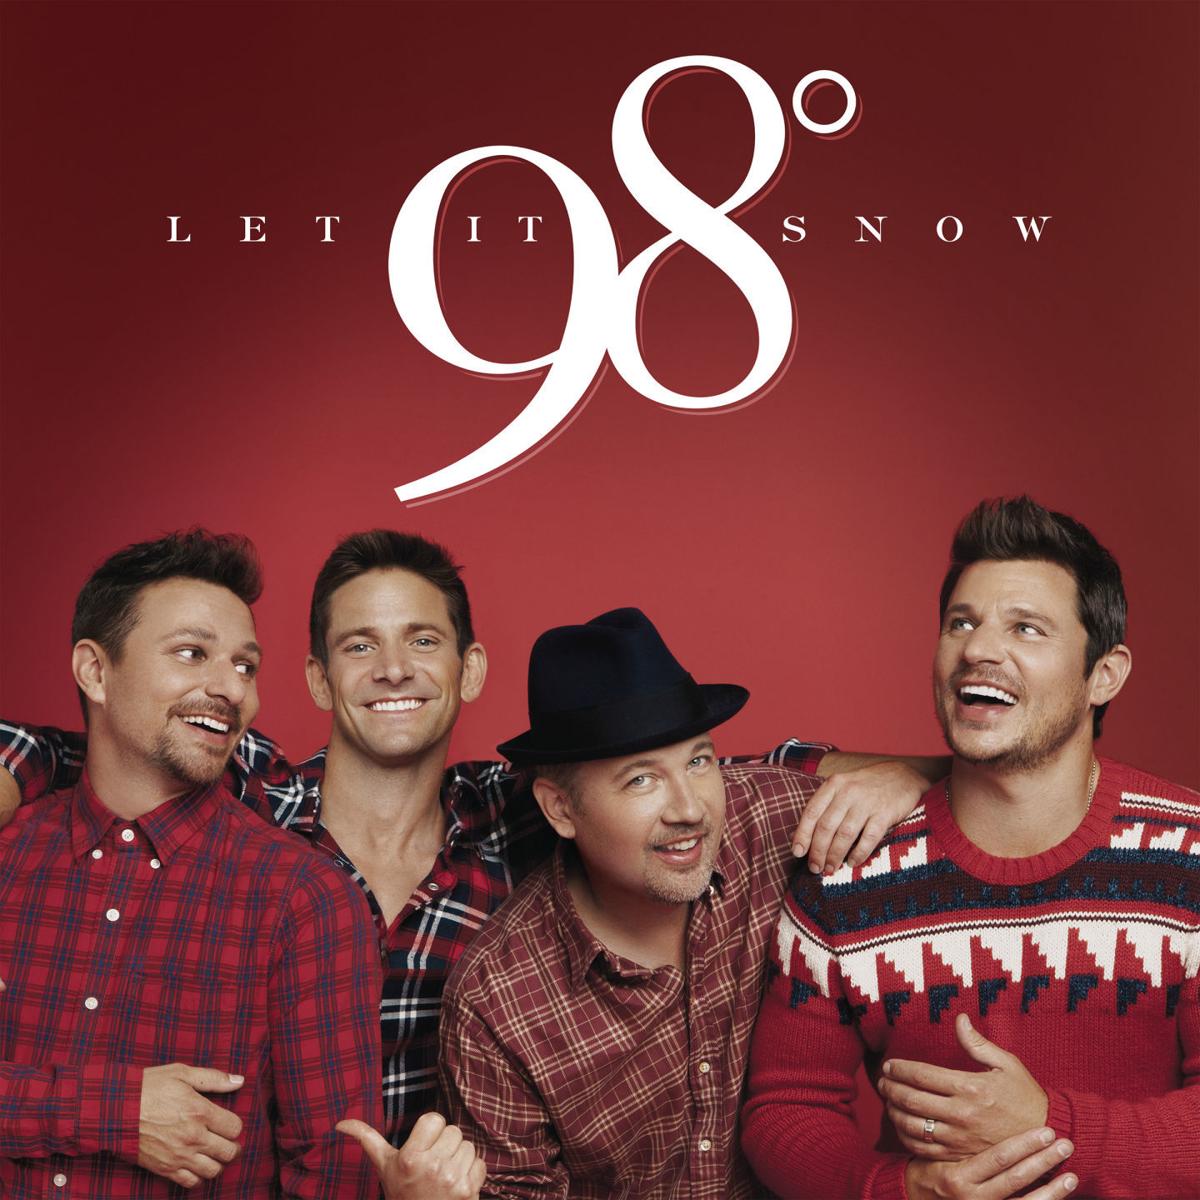 98-degrees-gets-ready-to-heat-up-lemoore-local-hanfordsentinel